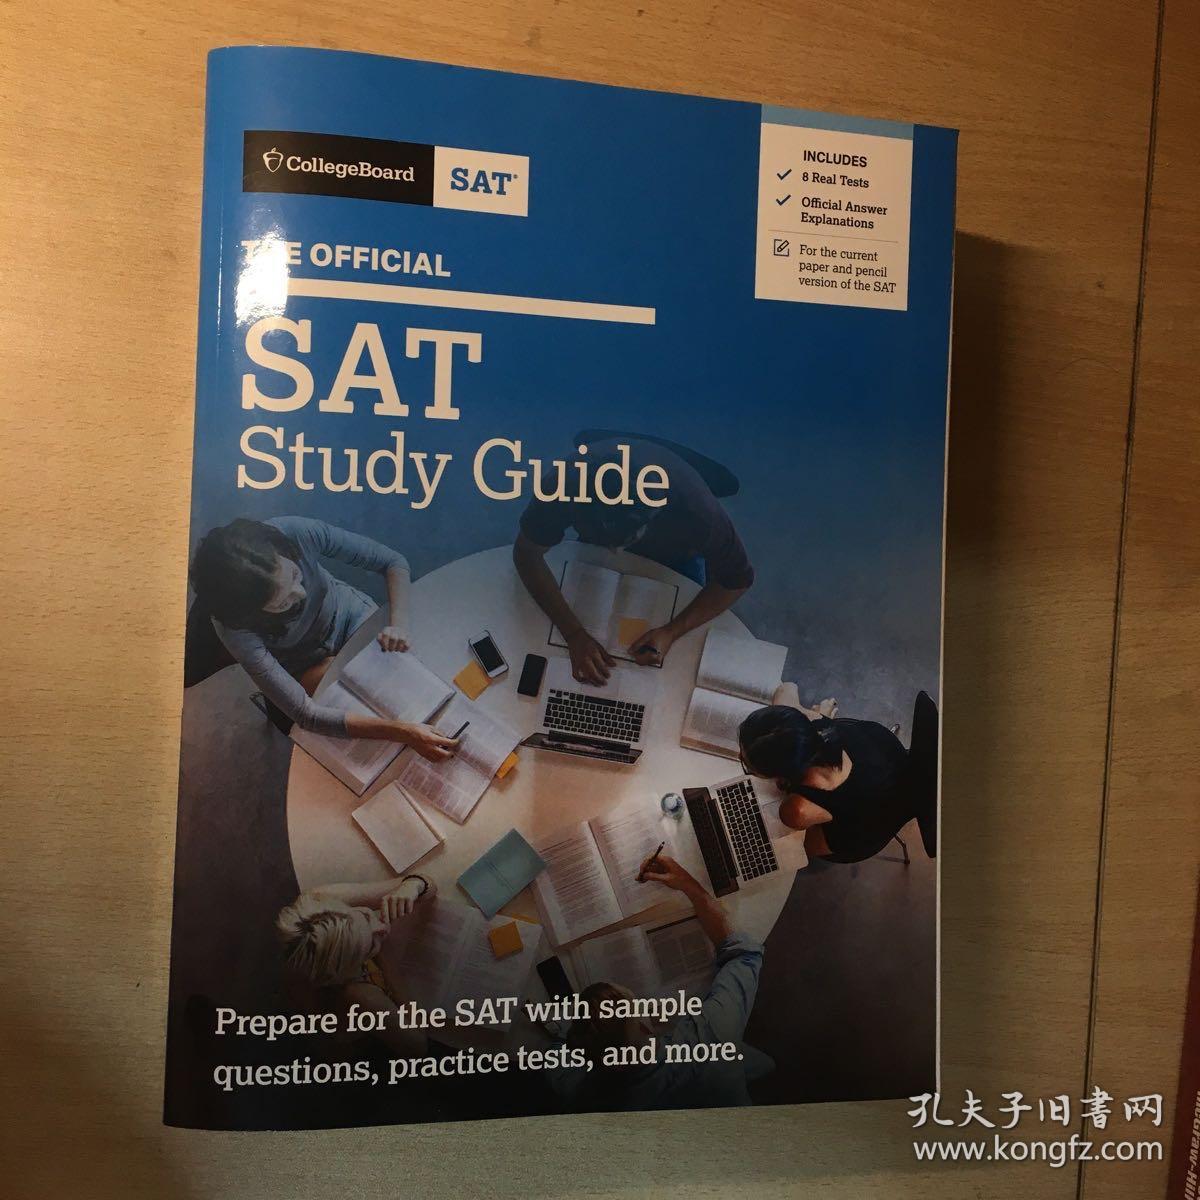 The official SAT study guide